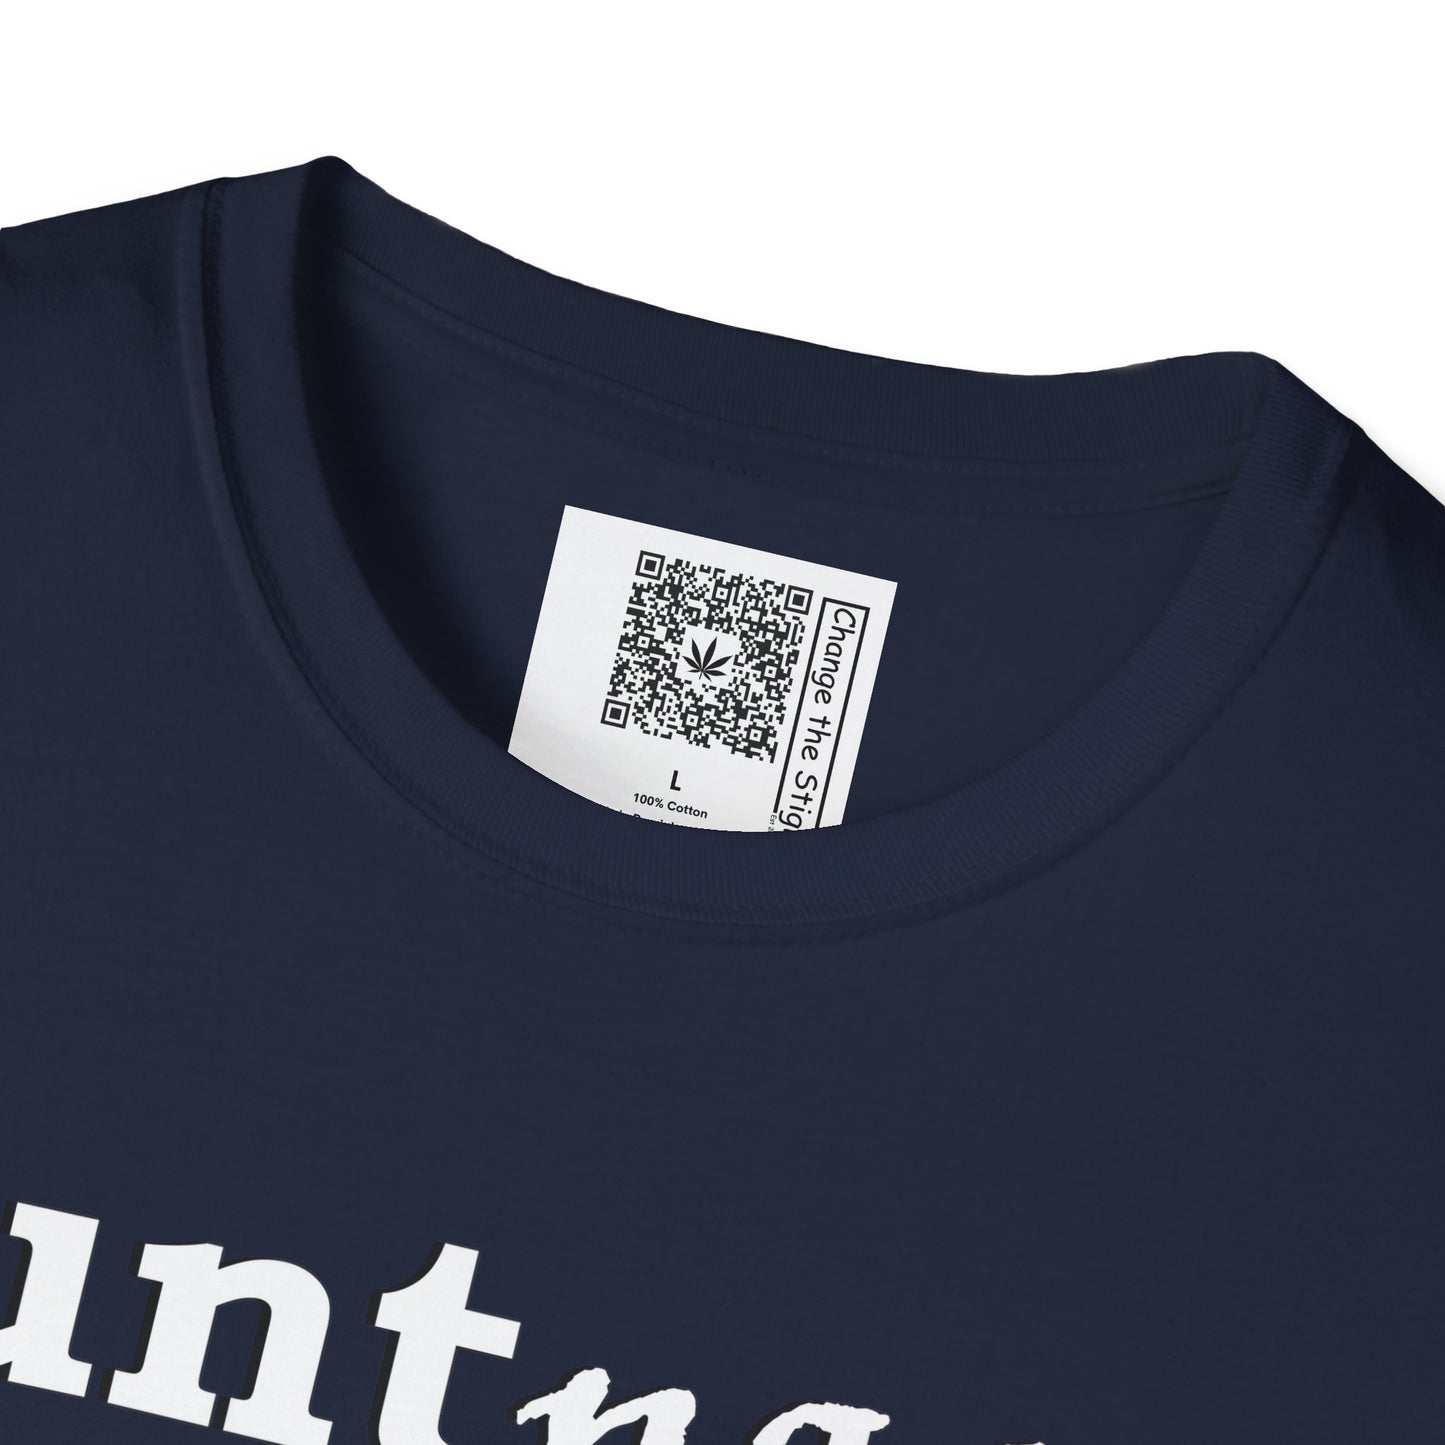 Change the Stigma, Navy color, shirt saying "blunt passer" , Shirt is open displayed, Qr code is shown neck tag